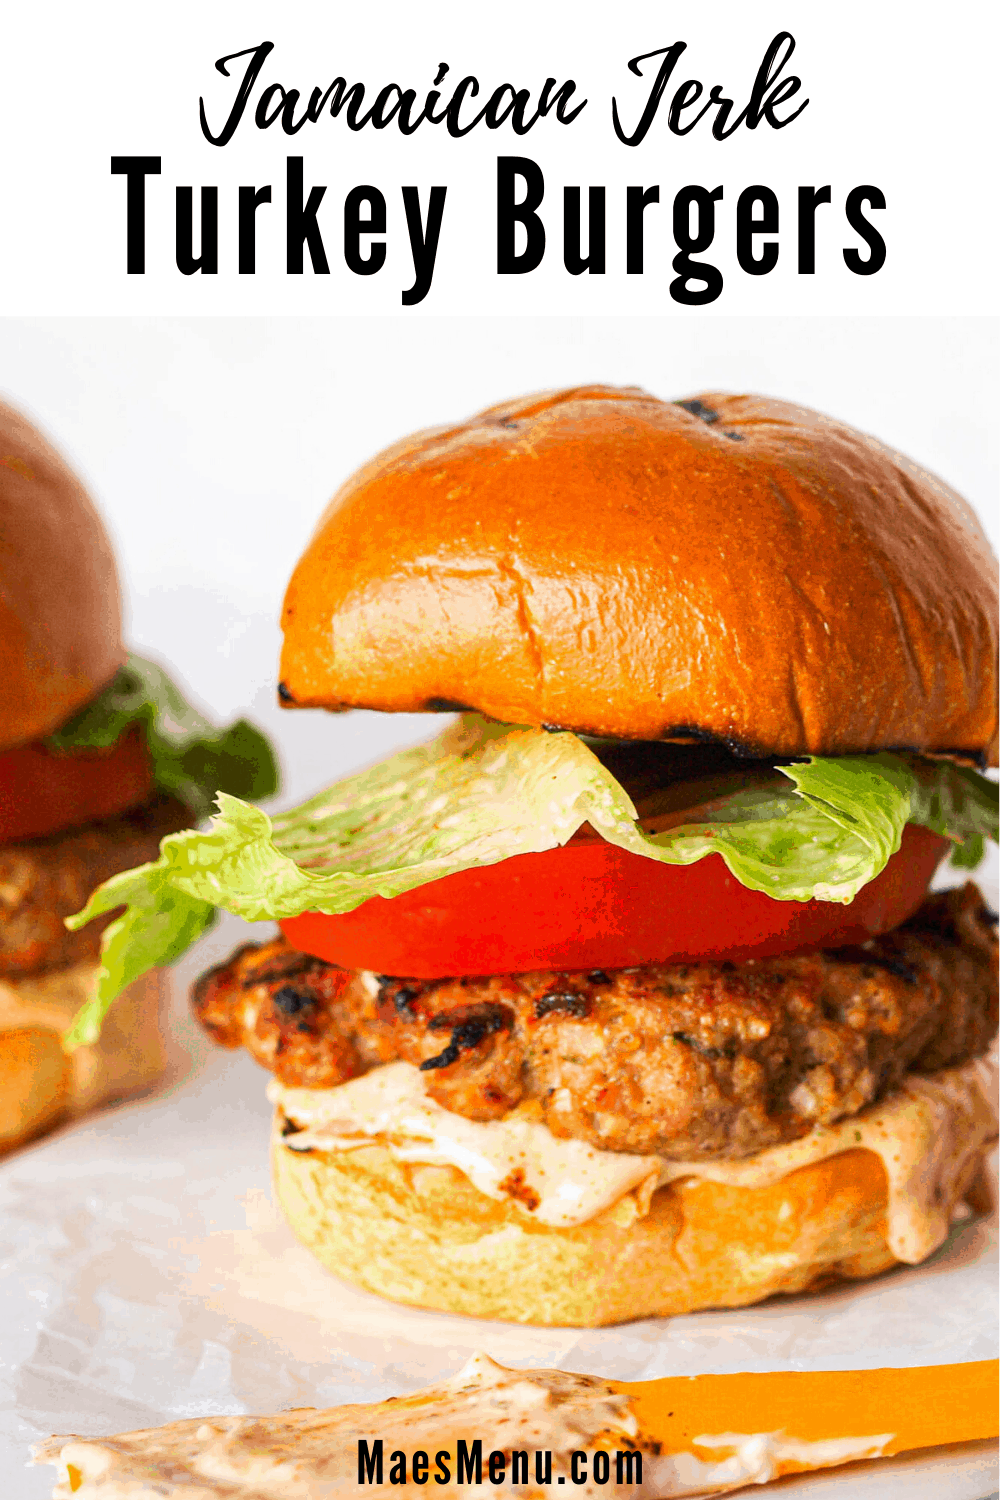 A pinterest pin for Jamaican Jerk Turkey Burgers with an up-close picture of a turkey burger with a spatula in the foreground.